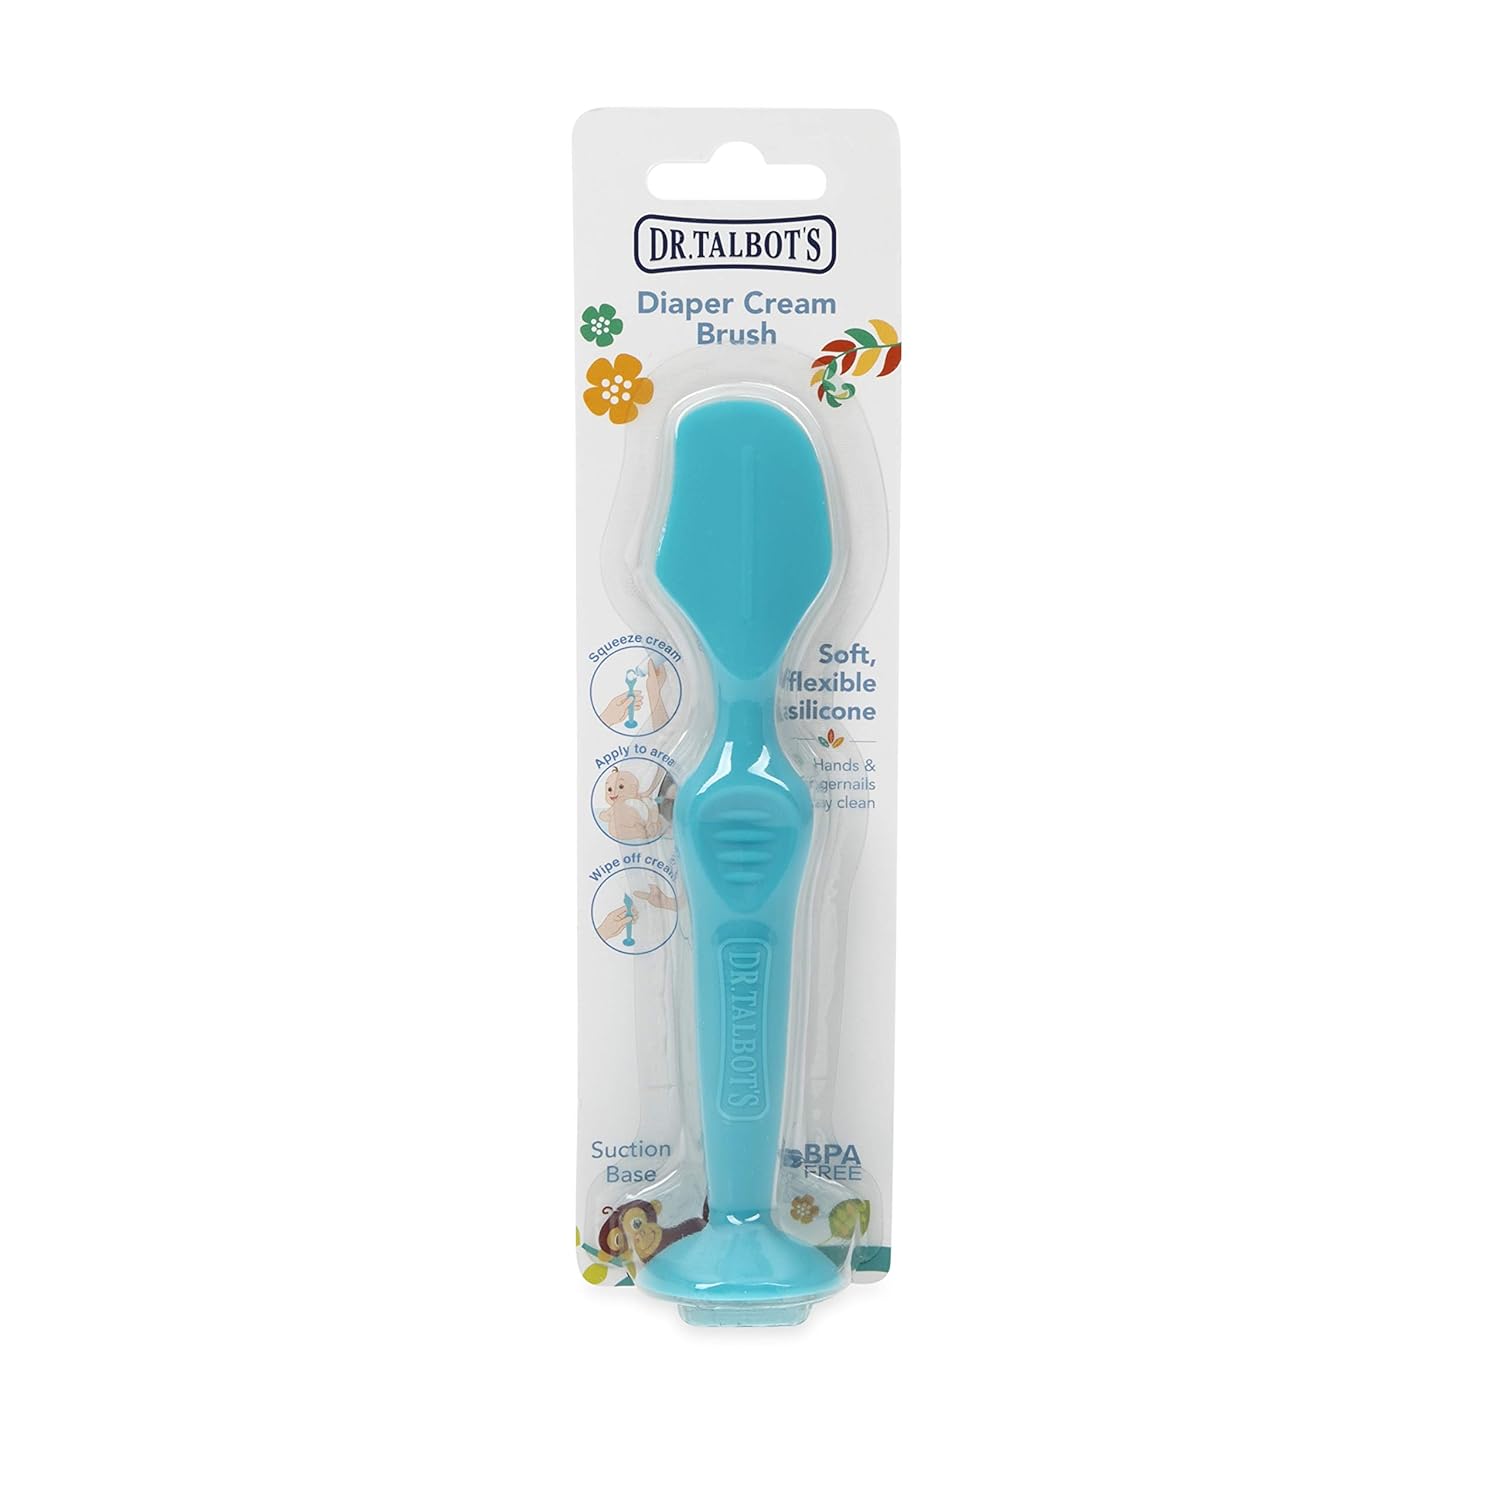 Nuby Dr. Talbots Silicone Diaper Cream Brush with Suction Base, Aqua : Baby